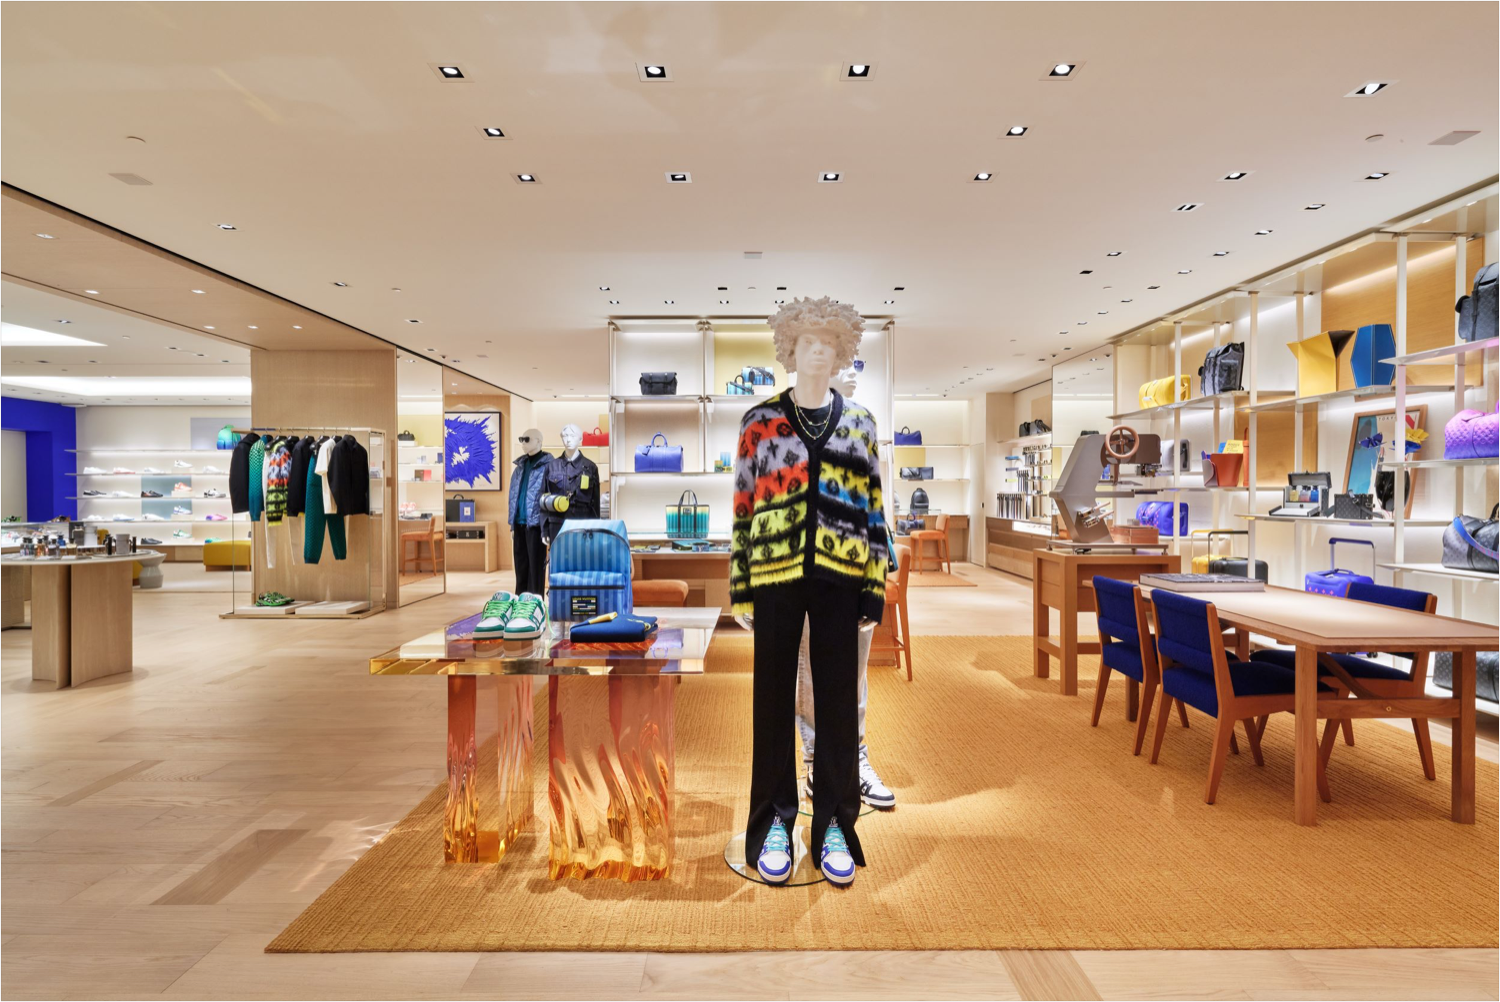 CPP-LUXURY.COM on X: Louis Vuitton to open new flagship store in Bogota,  Colombia  #LouisVuitton #LV #LouisVuittonColombia  #LVColombia #LVBogota #Bogota #Colombia #lujo #luxe #lux #luxury  #newopening #store #newstore